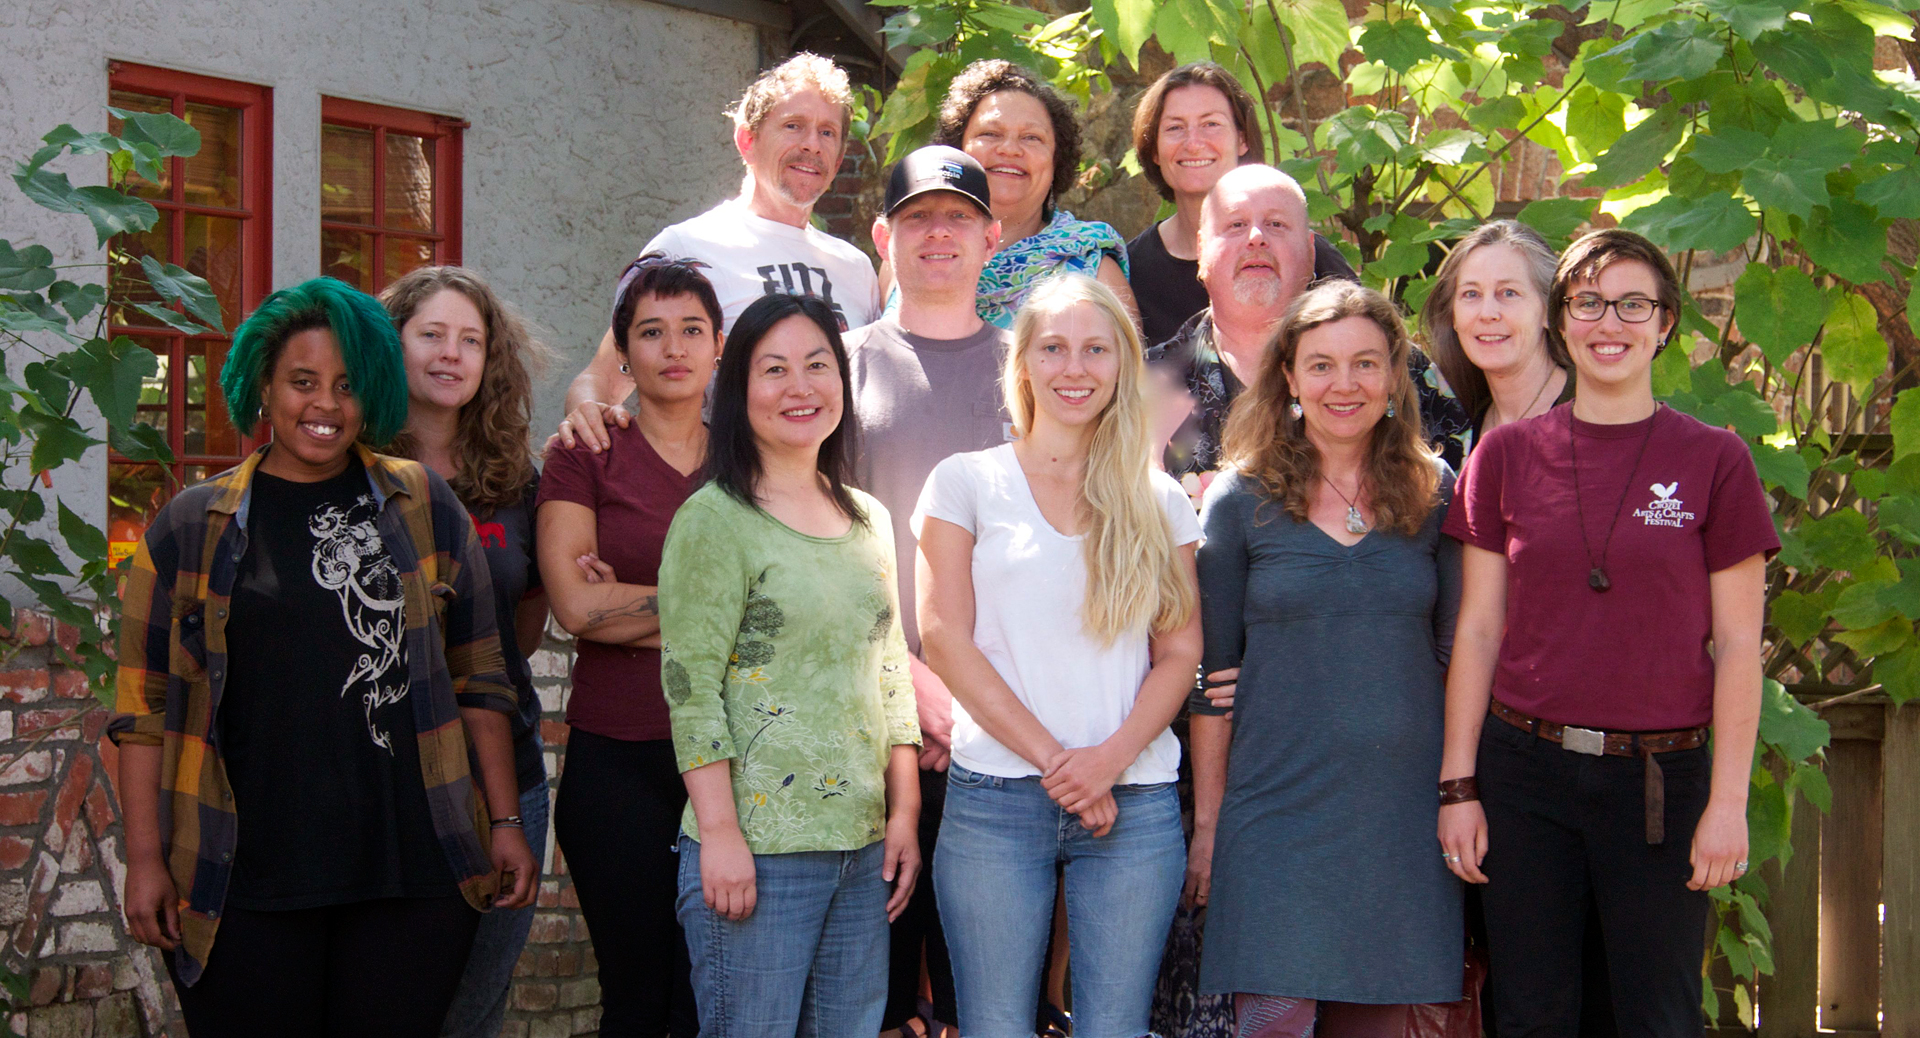 13 of the current worker-owners: back row L-R: Andy Renard, Porsche Combash, Linda Kallenberger Front, L to R: Sandra Kyle, Shannon Lott, Connie Del Rio, Misa Koketsu, Otto Thorsen, Hanna Towers, Mud Hut, Jessica Prentice, Mary Dee, Raty Syka